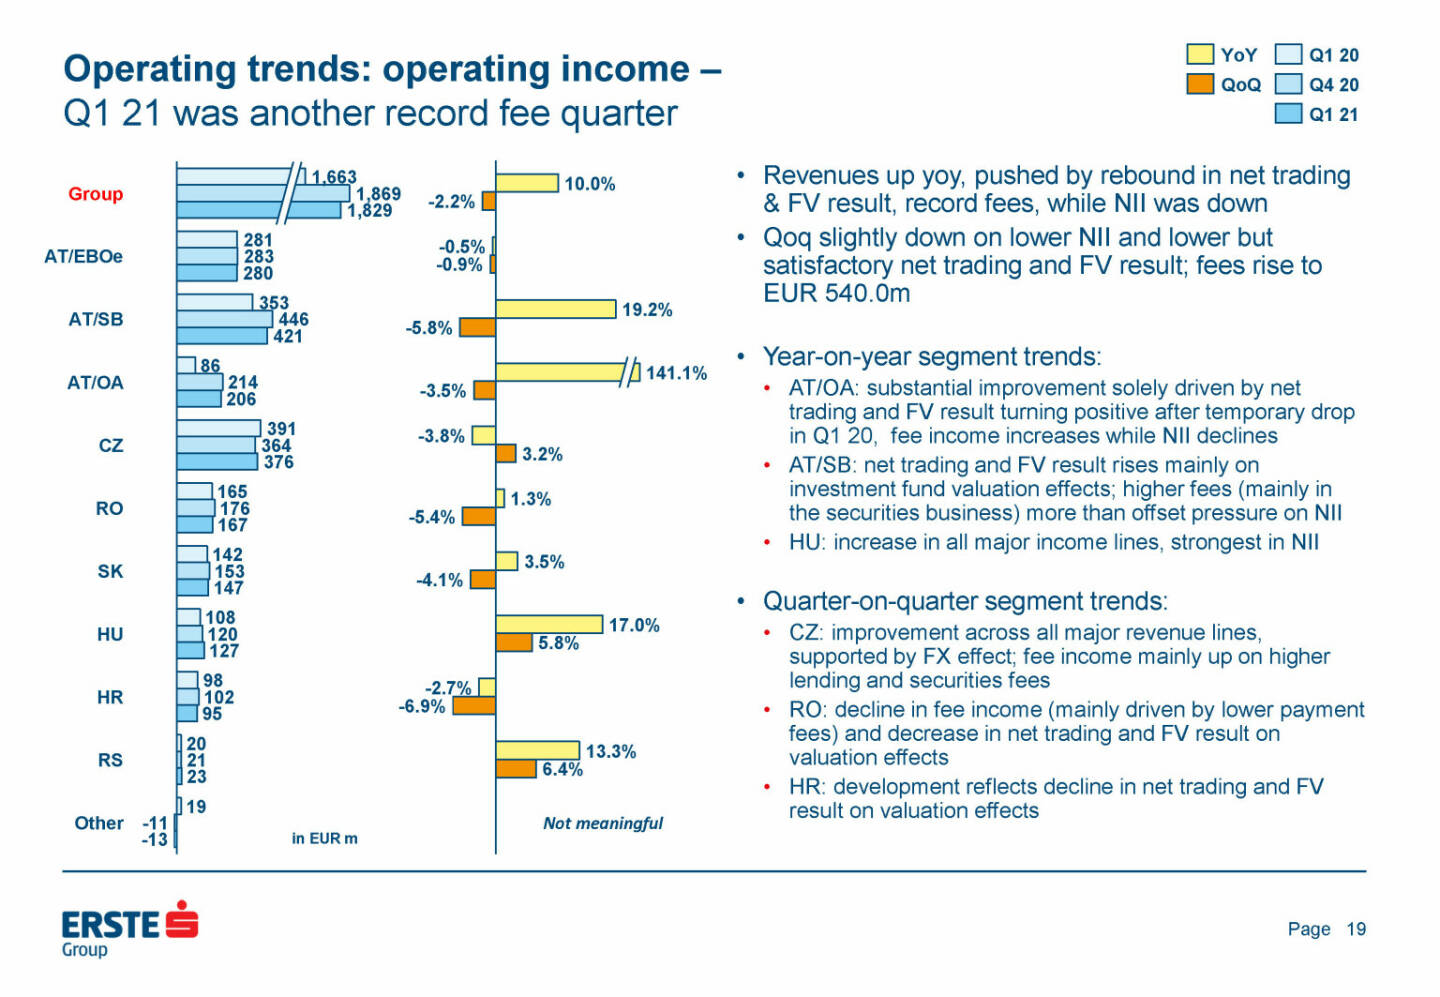 Erste Group - Operating trends: operating income